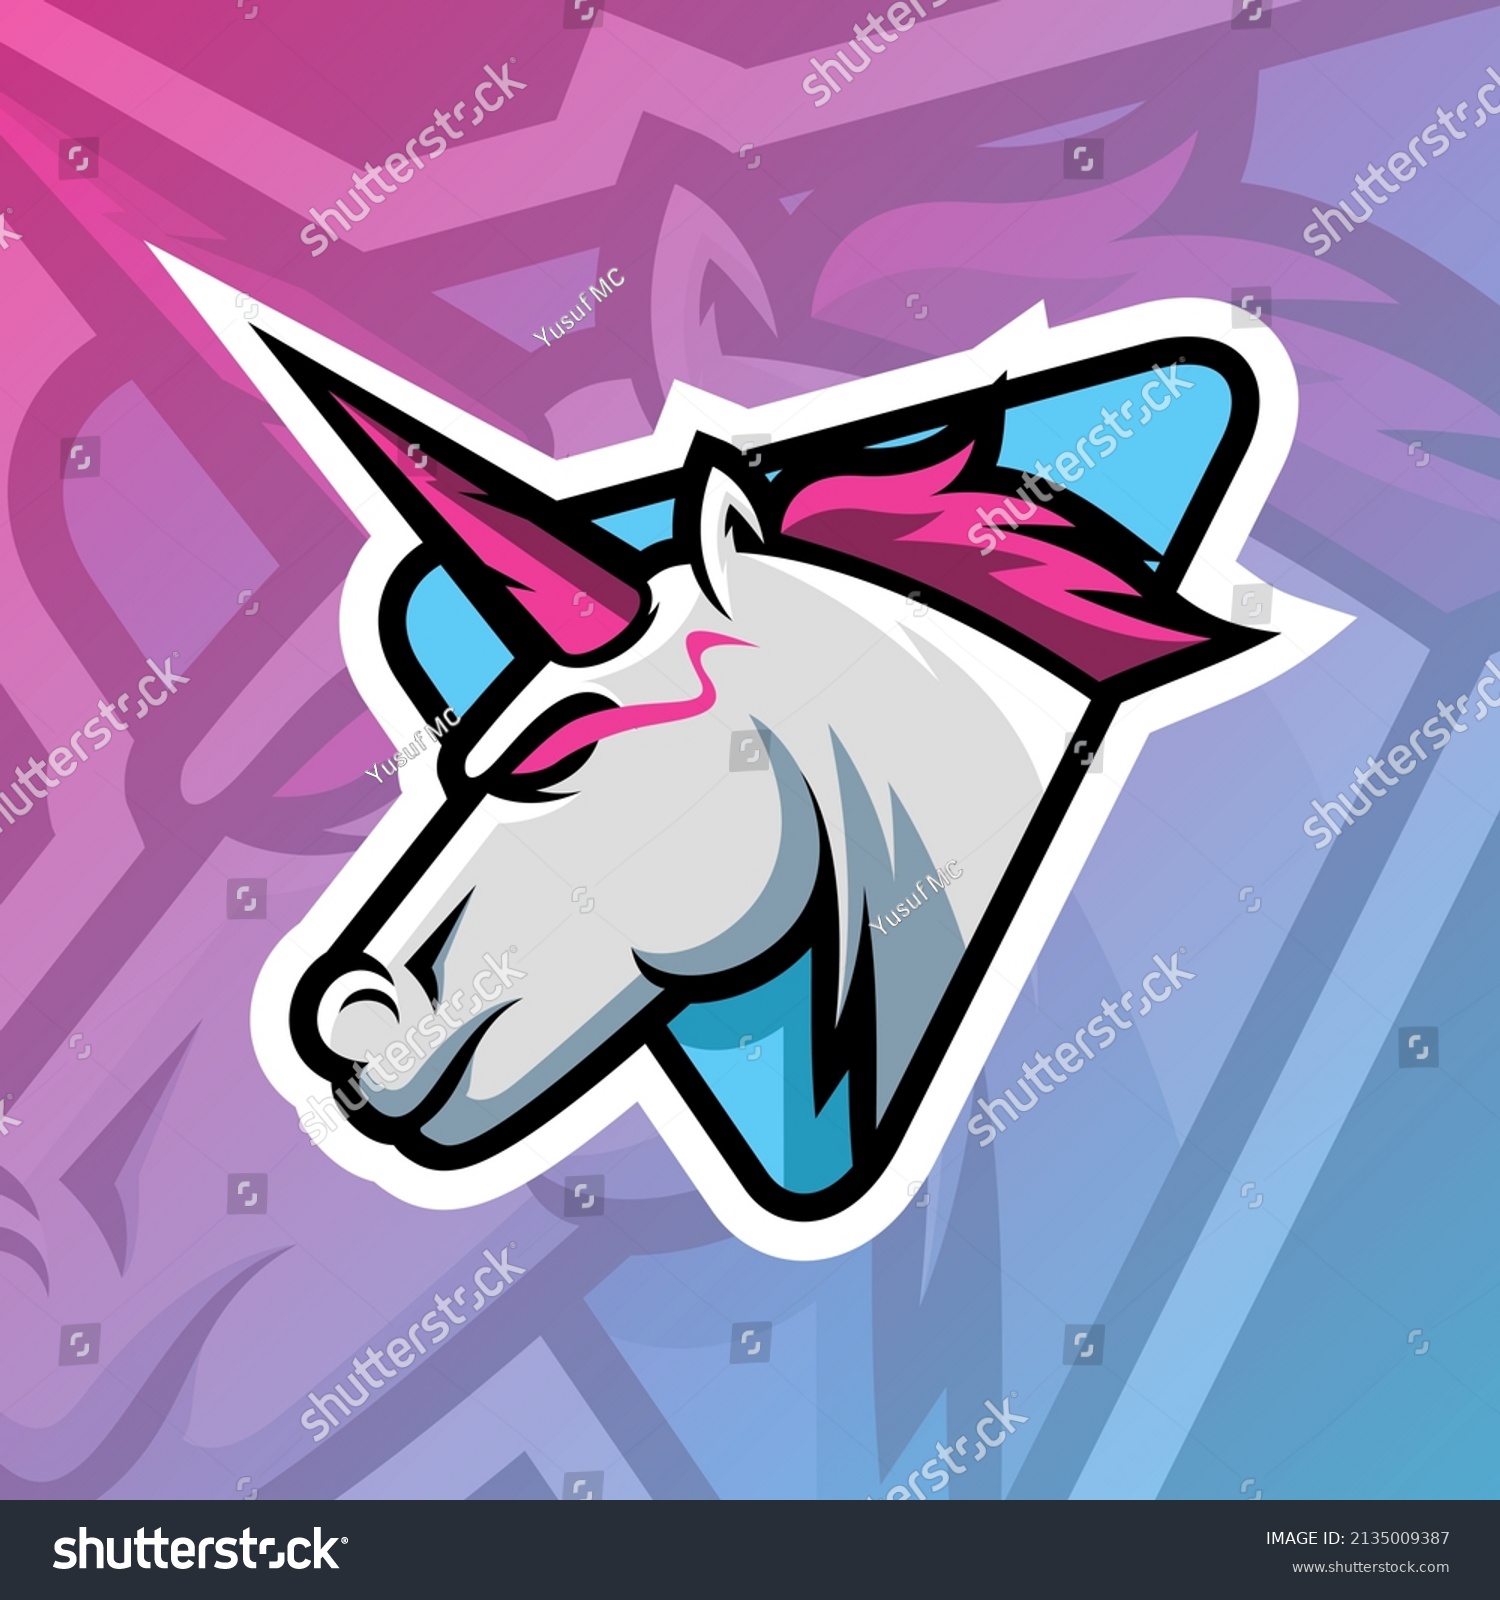 SVG of vector graphics illustration of a unicorn in esport logo style. perfect for game team or product logo svg